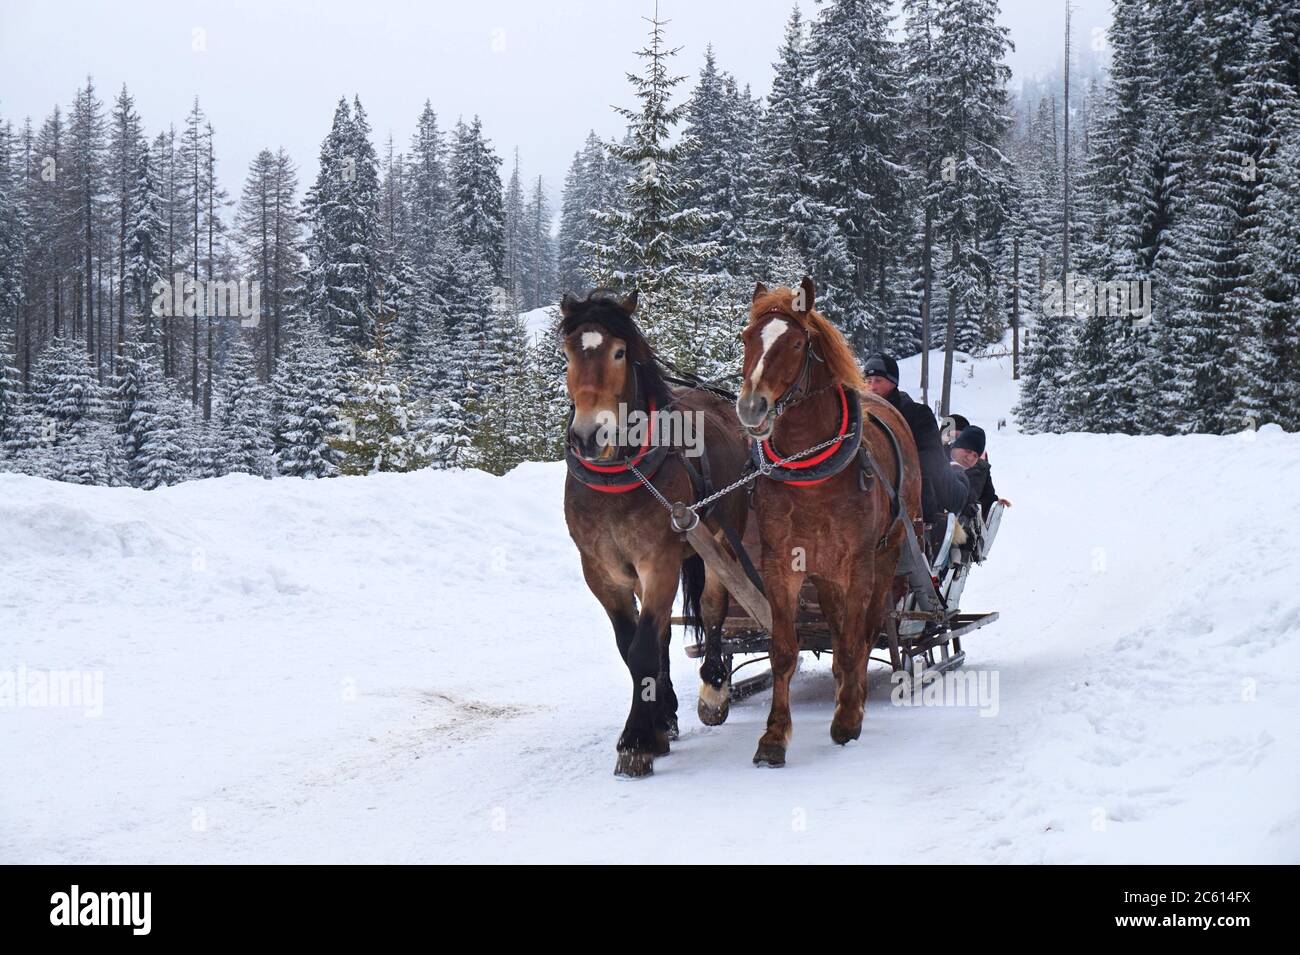 TATRY, POLAND - FEBRUARY 19, 2017: People ride a horse sleigh to Morskie Oko lake in Tatra National Park, Poland. It's one of most recognized tourism Stock Photo